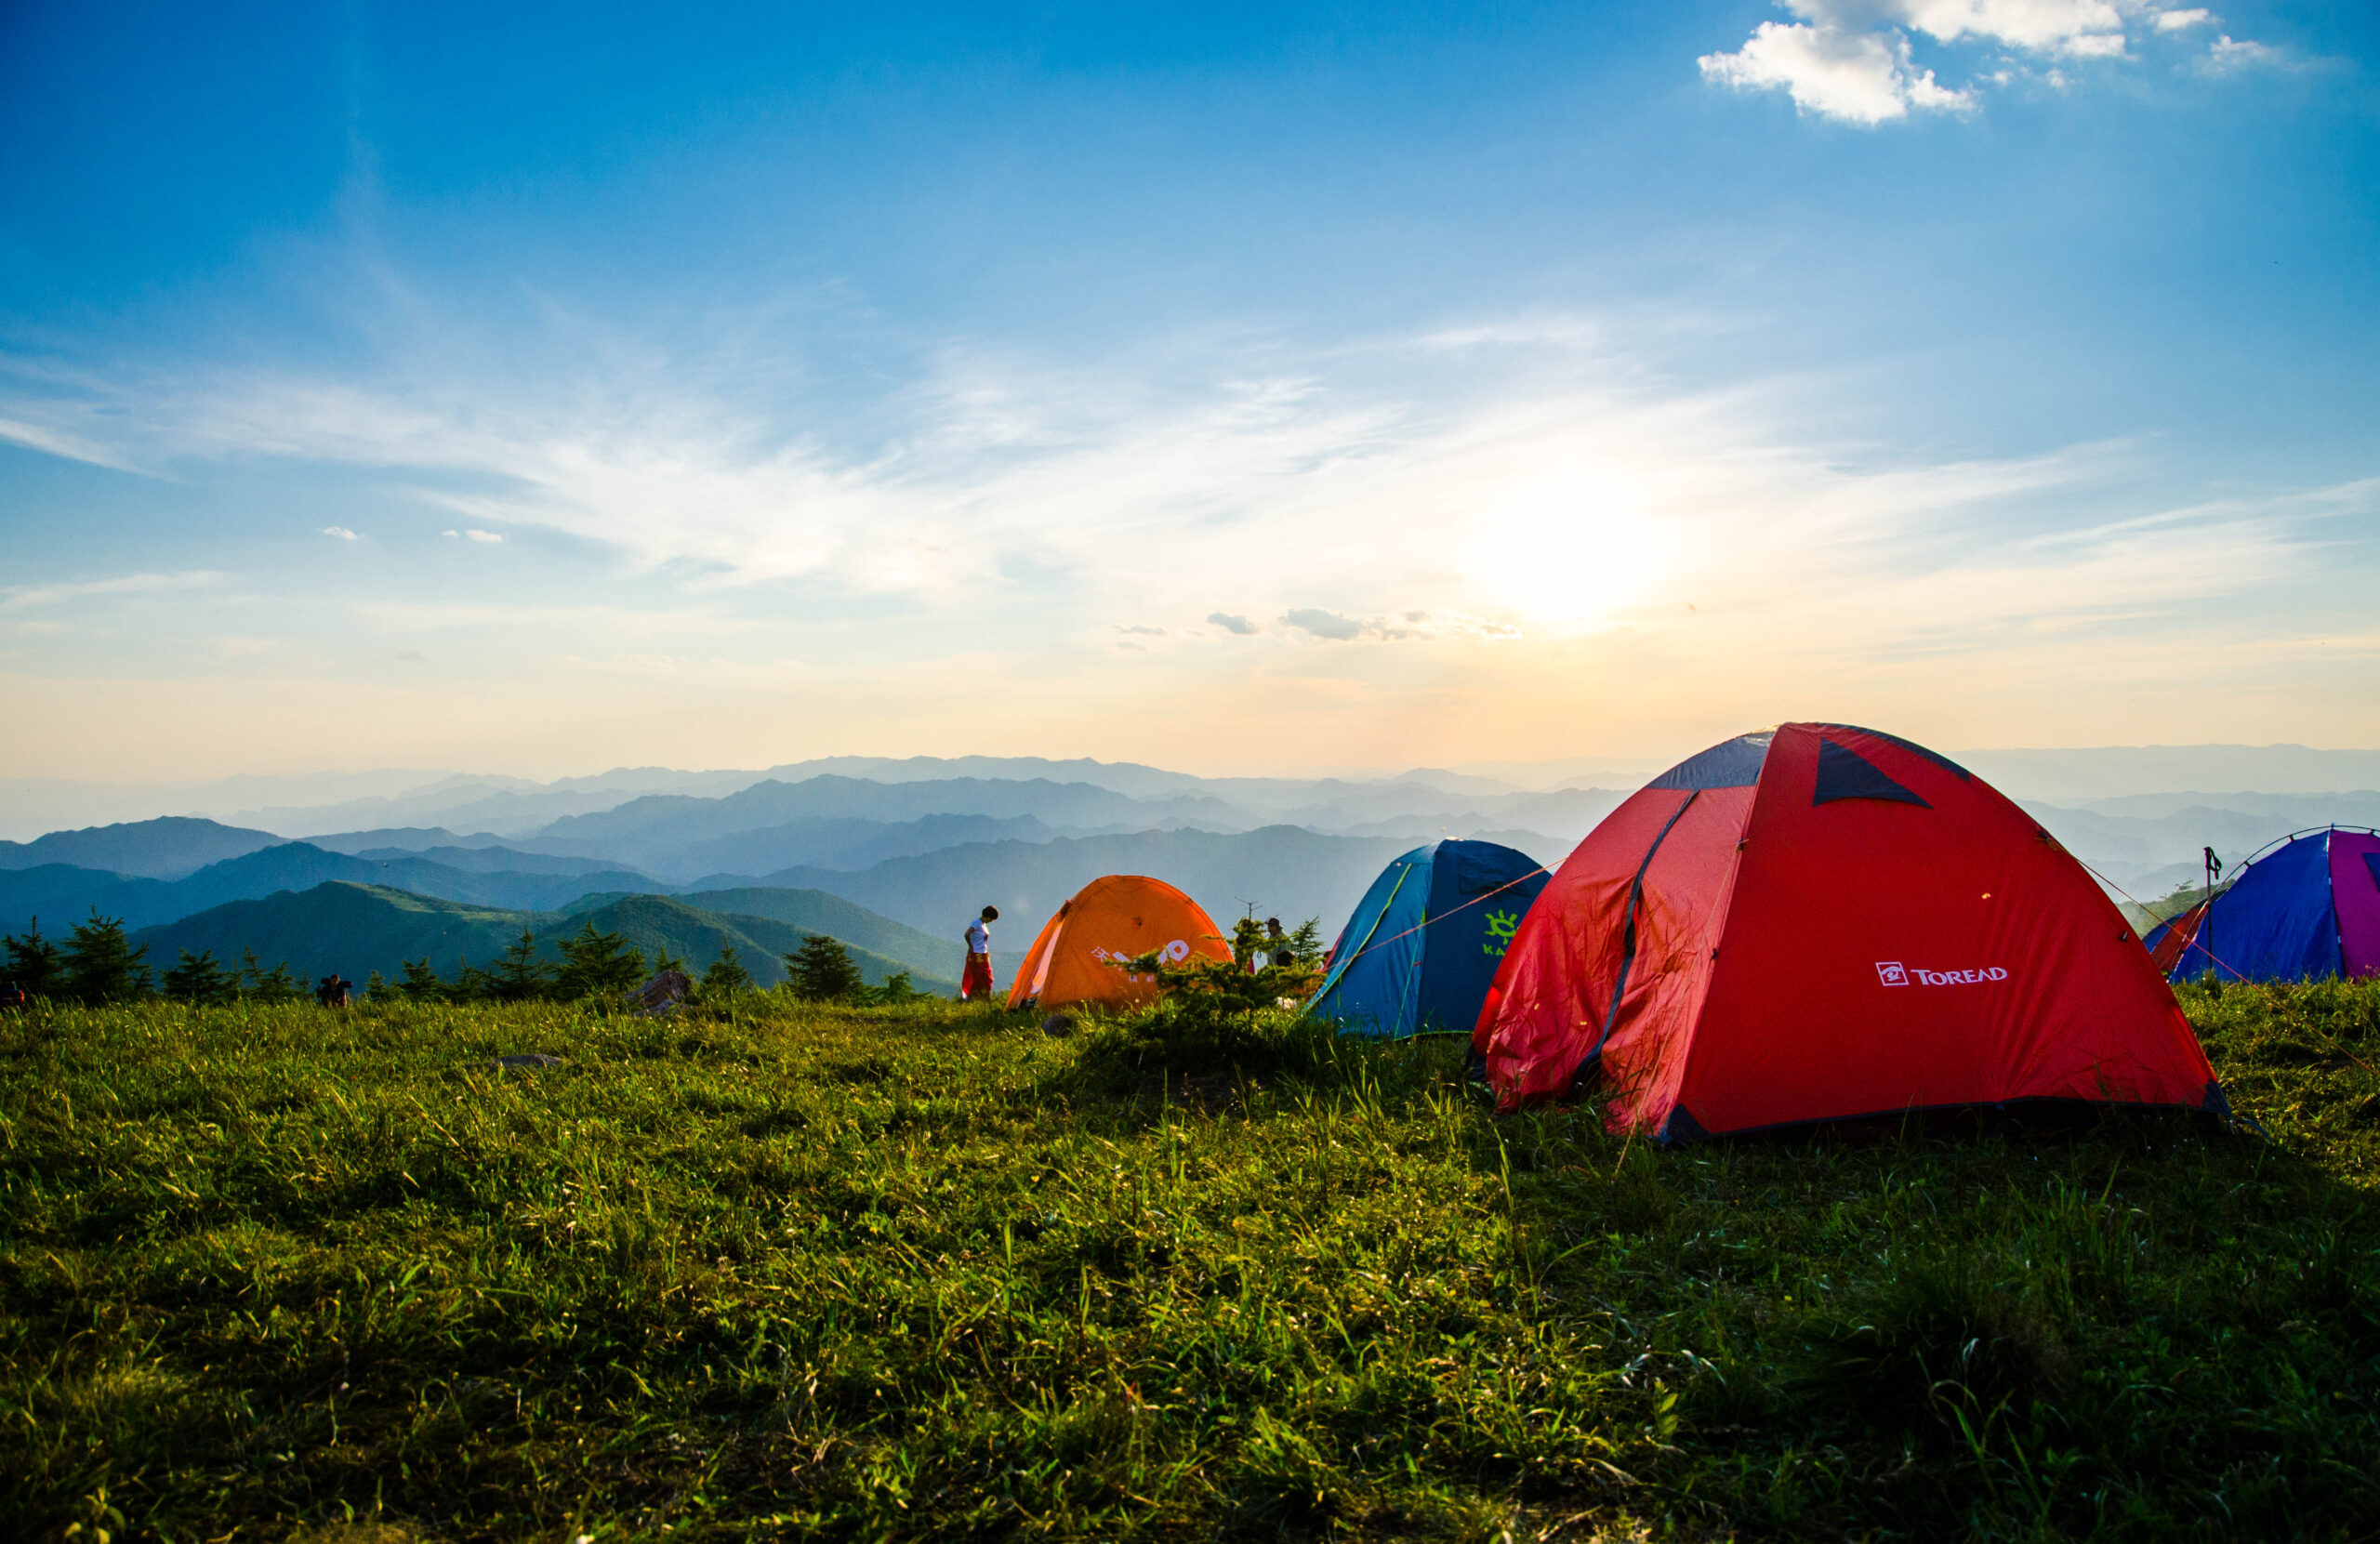 How to Plan a Camping Trip